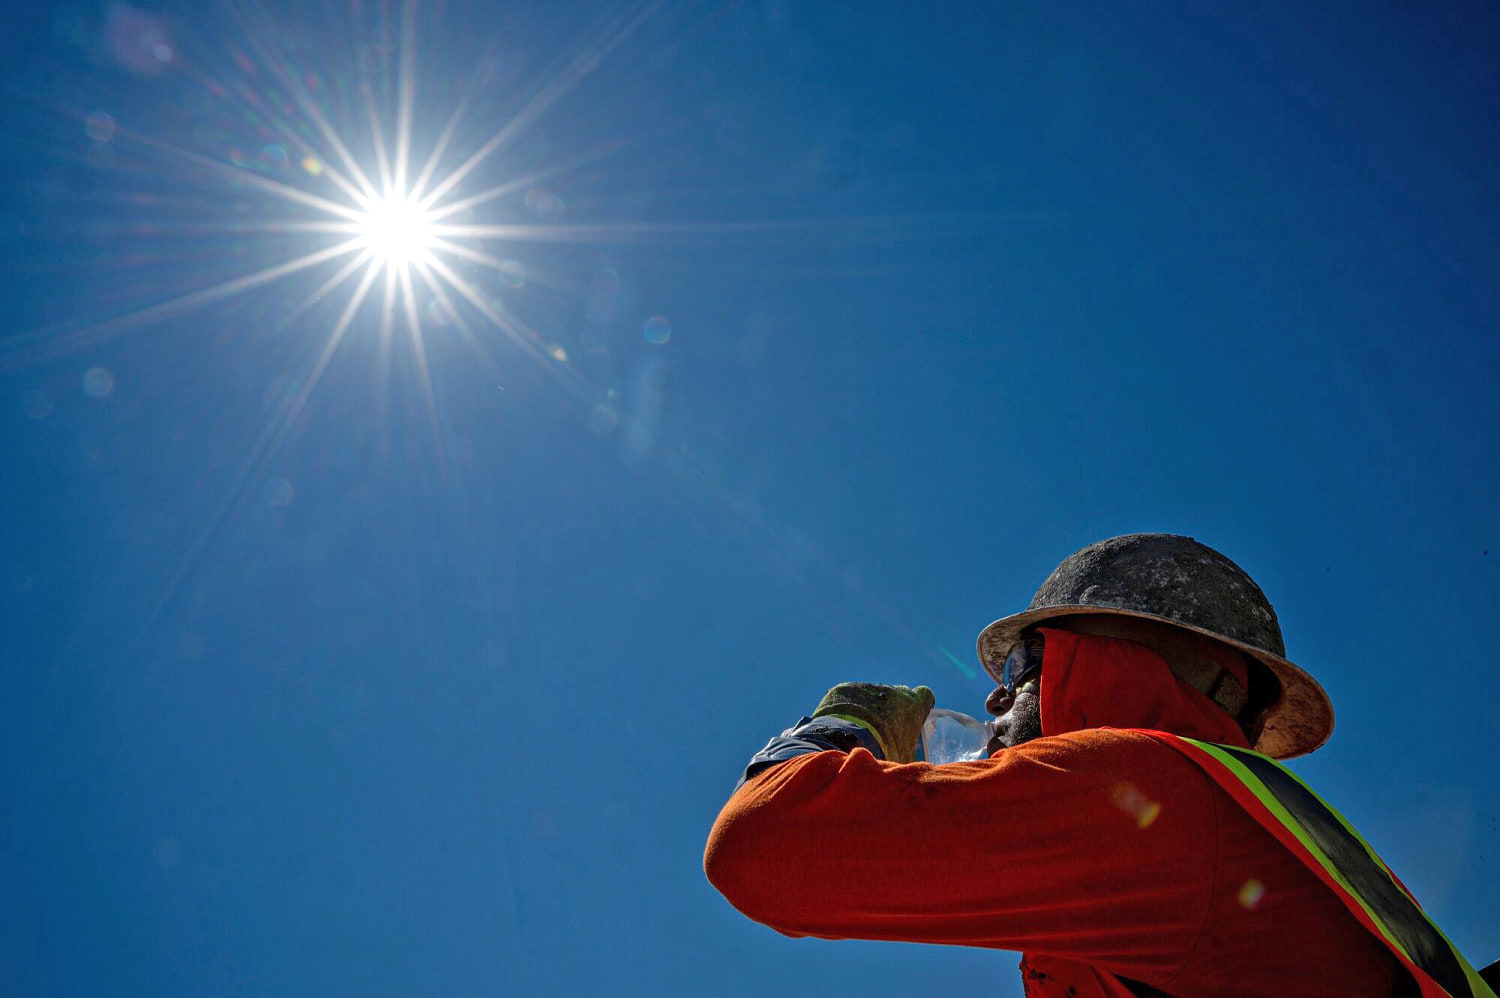 Peak heat wave might soon be over, but health risks remain as temperatures begin to cool